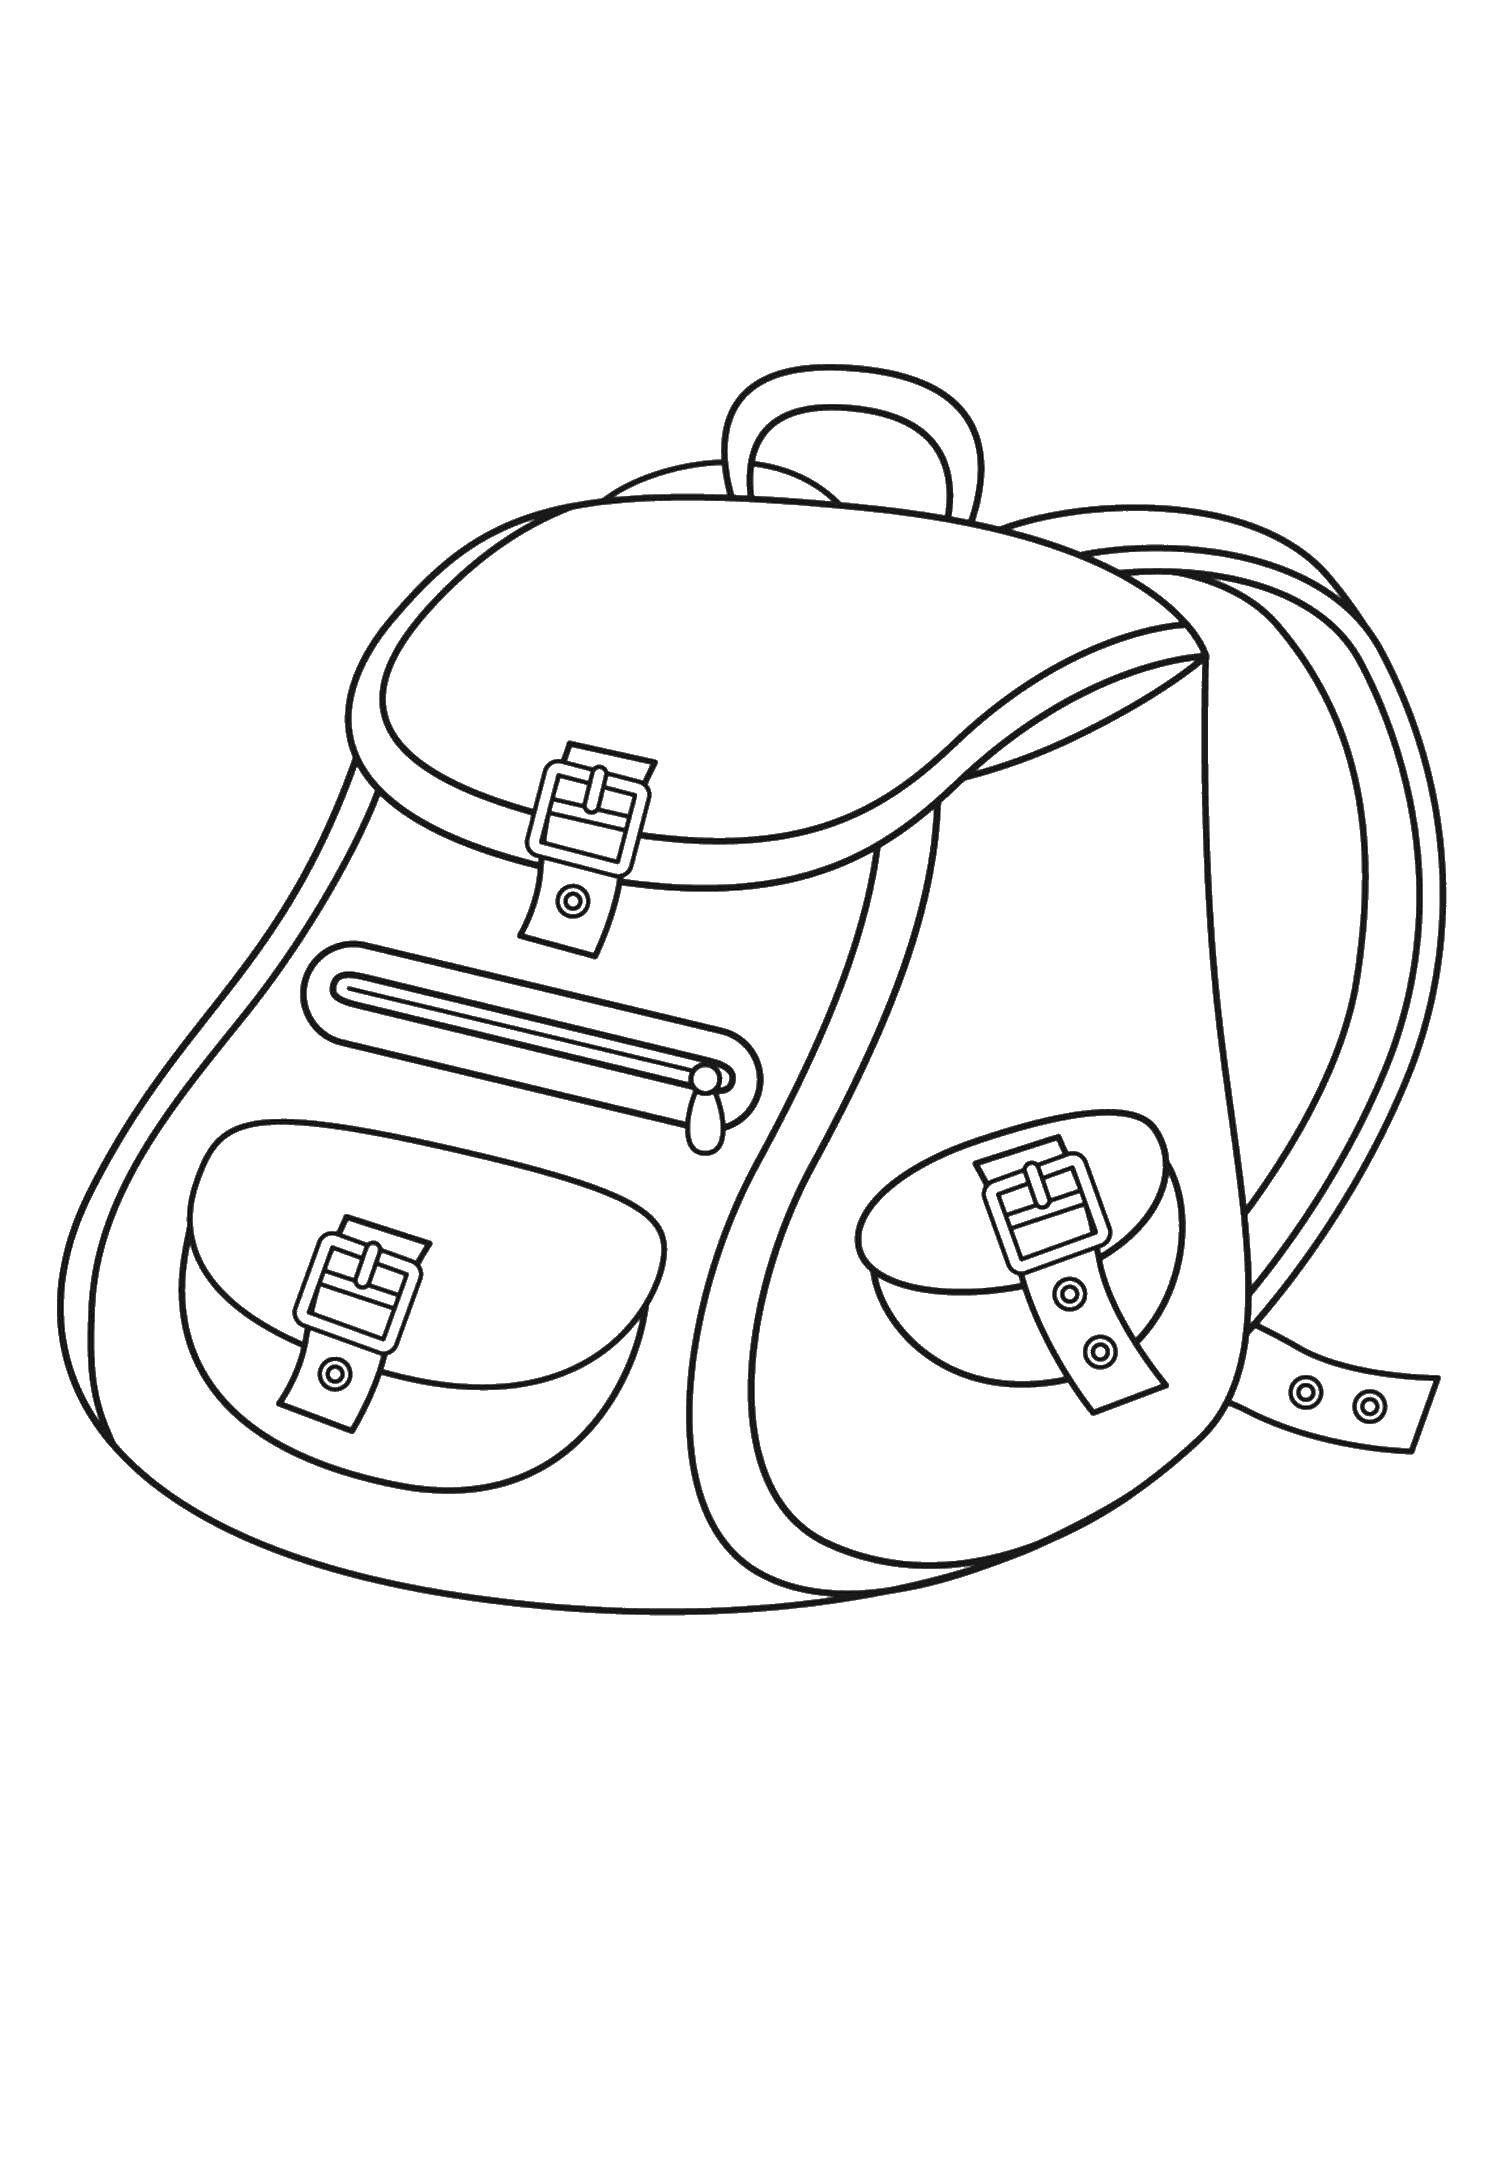 Coloring Large satchel. Category school supplies. Tags:  School supplies.